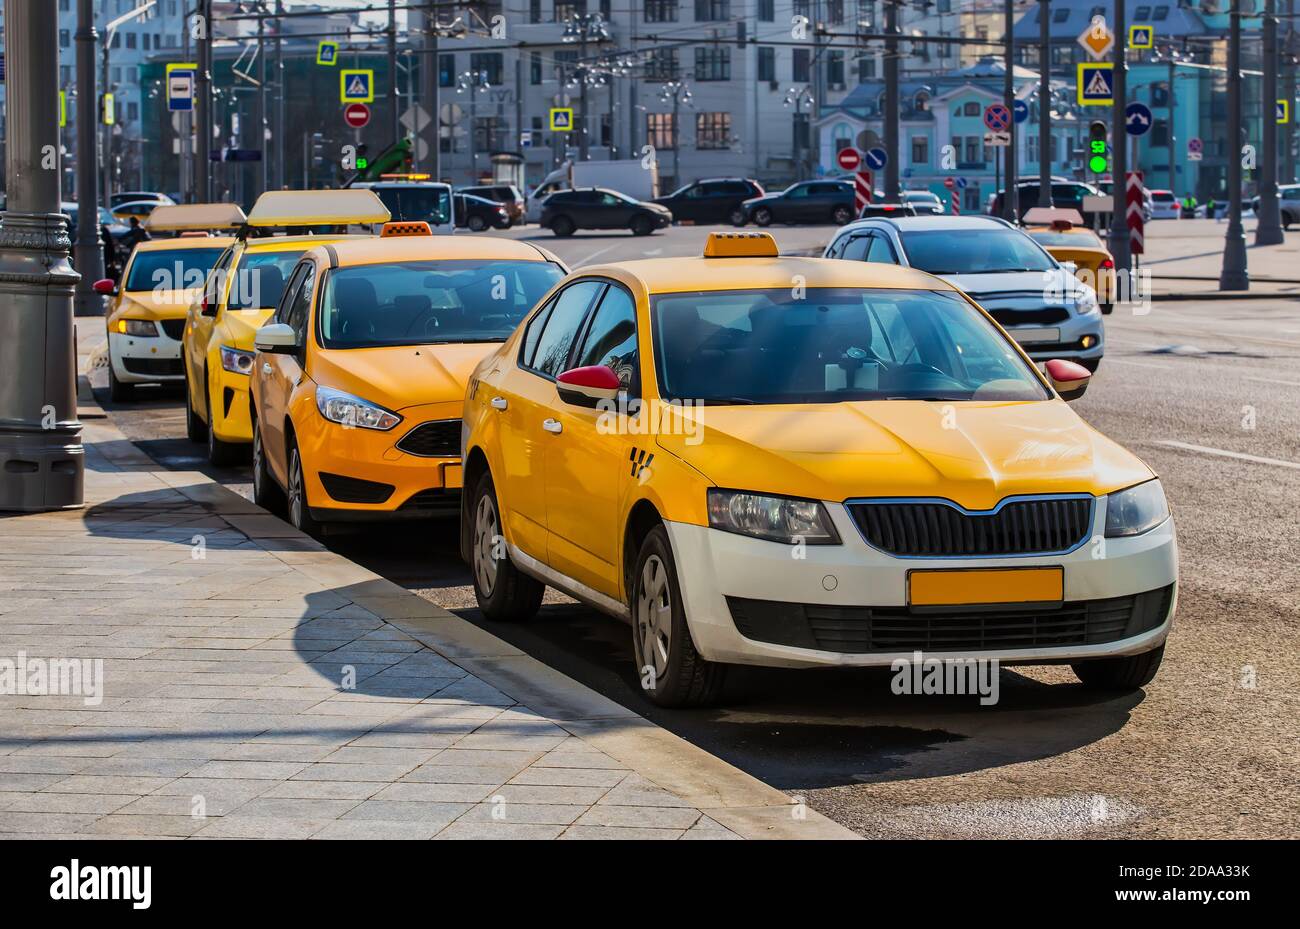 Lots of Yellow Taxis in the City centre Parking lot Stock Photo